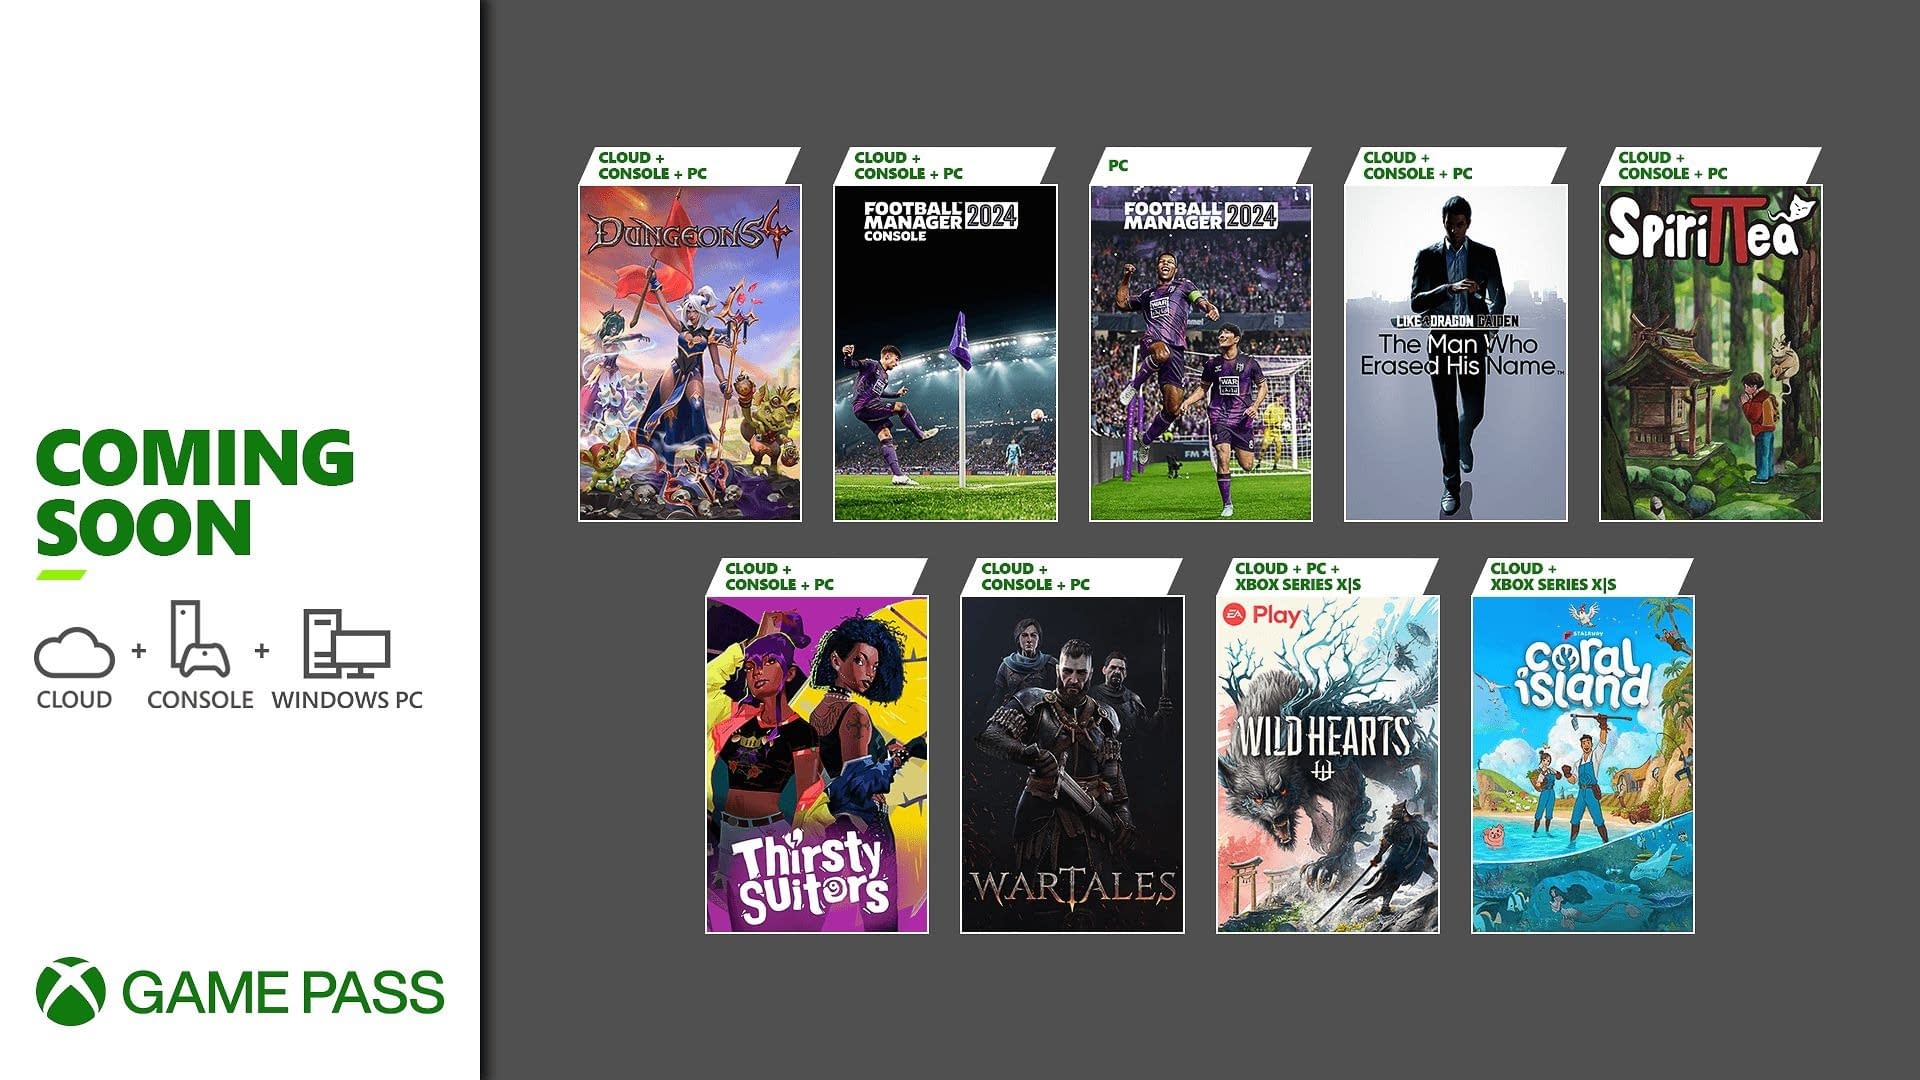 The Future Games Announced On Xbox Game Pass On November: 3.500 TL Value!